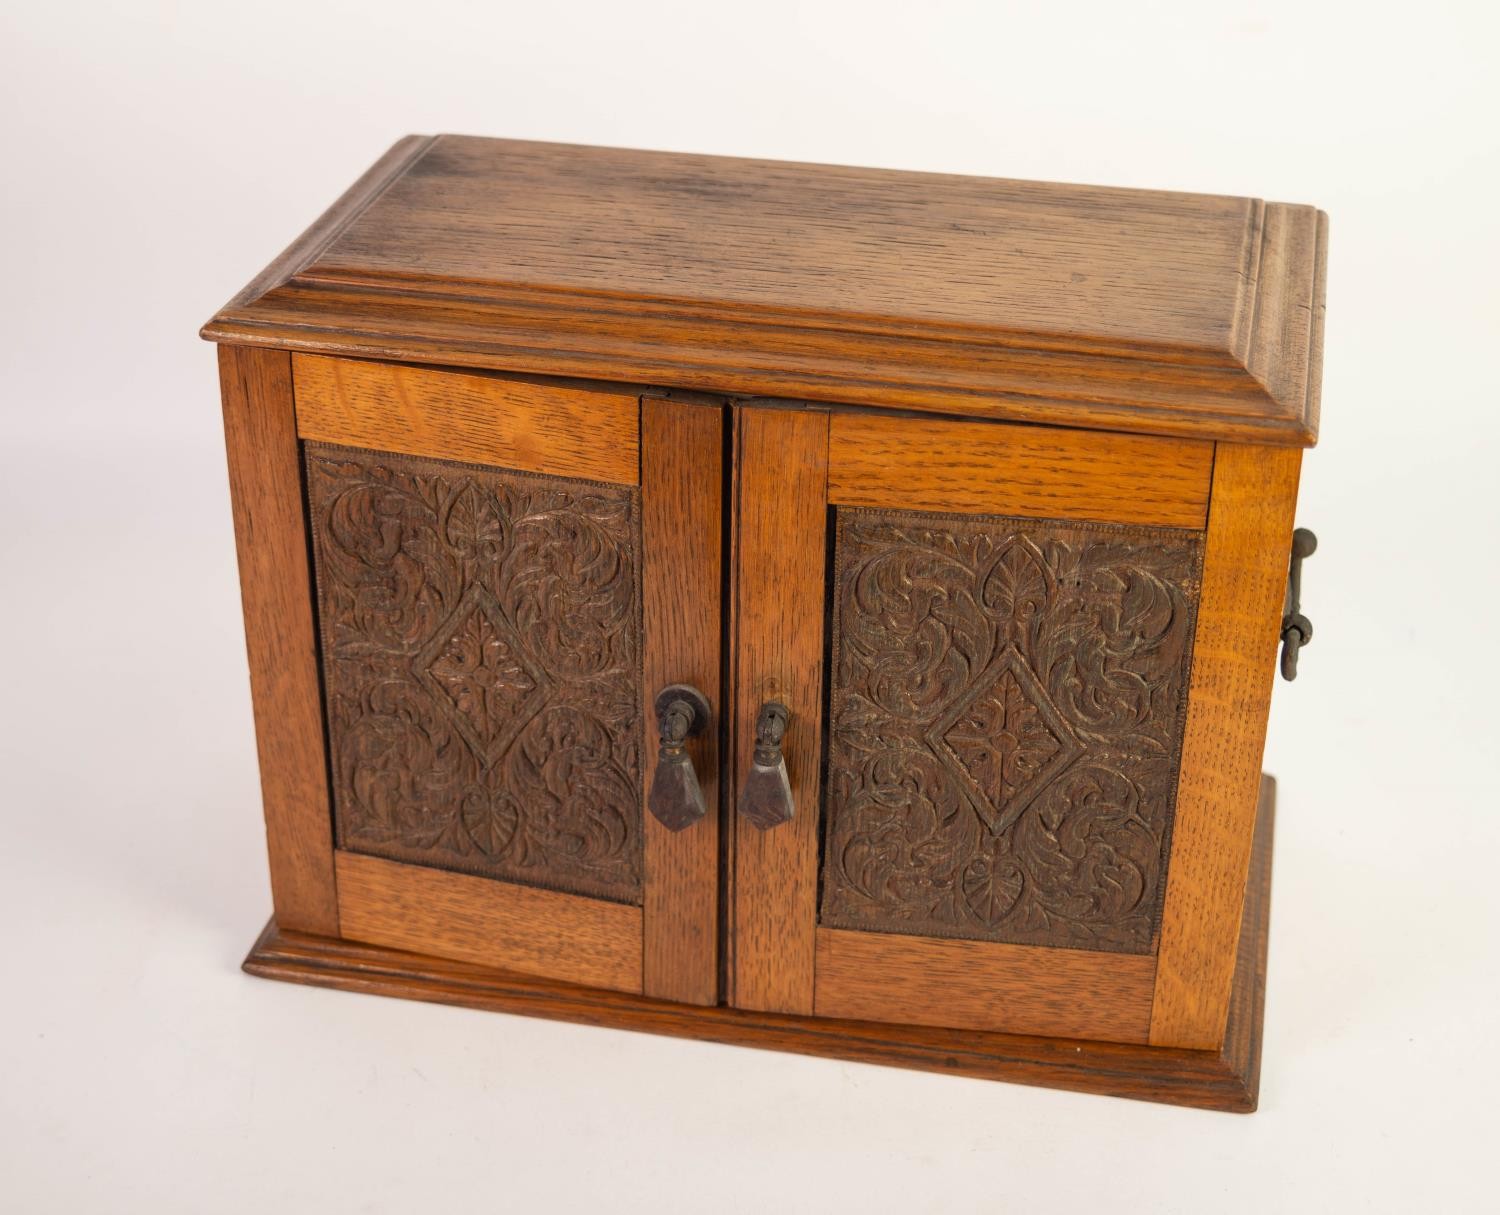 CIRCA 1920s CARVED OAK TWO DOOR SMOKER'S CABINET with hinge opening top, later fitted with four